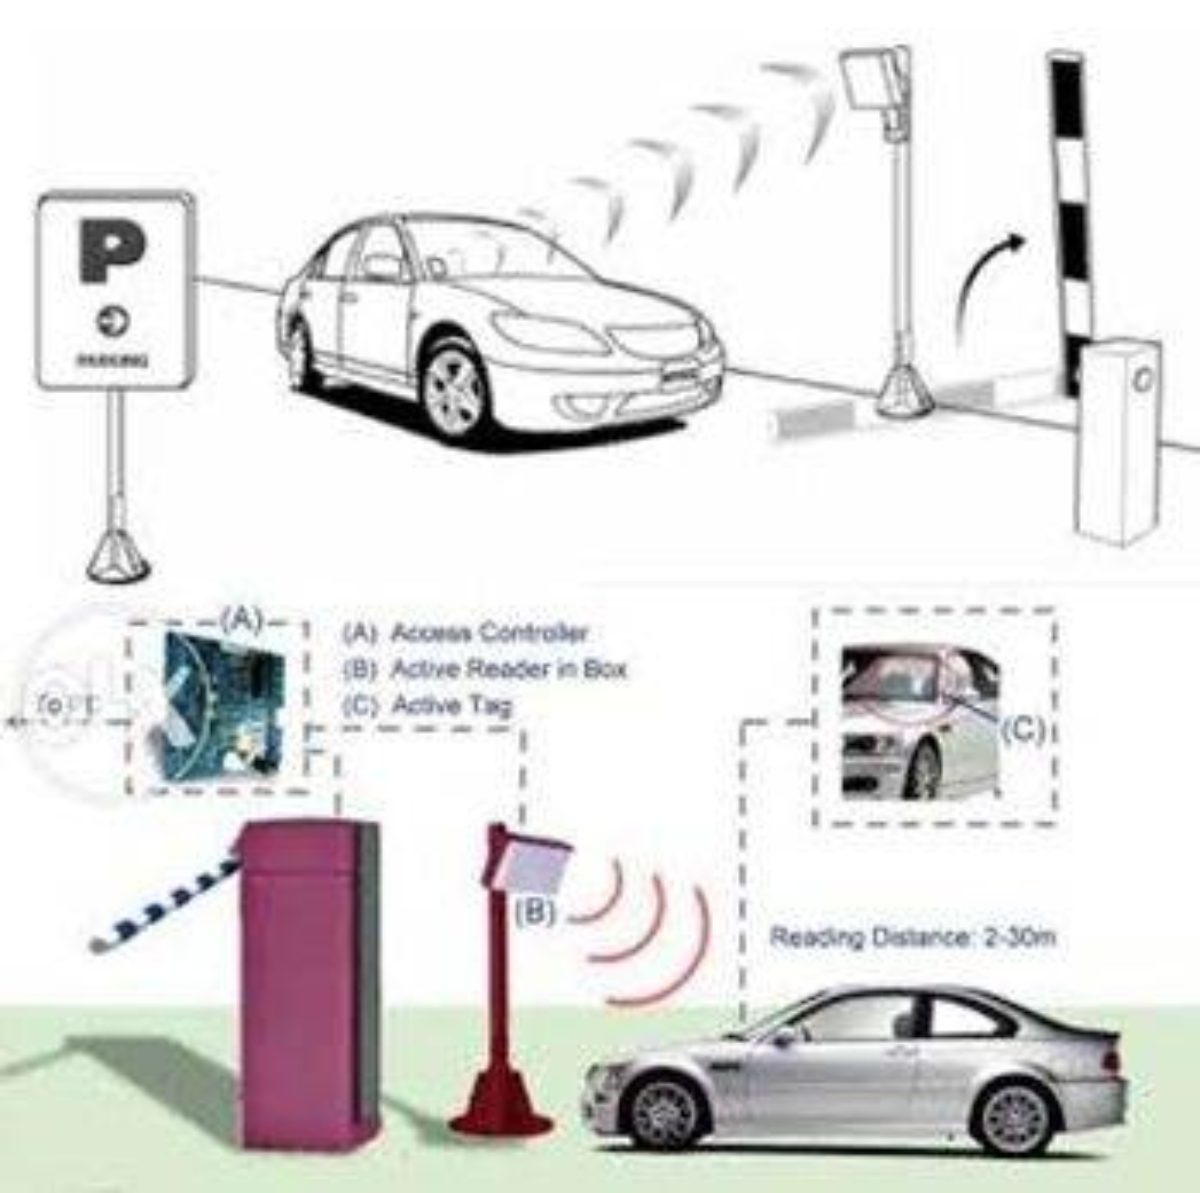 parking management systems